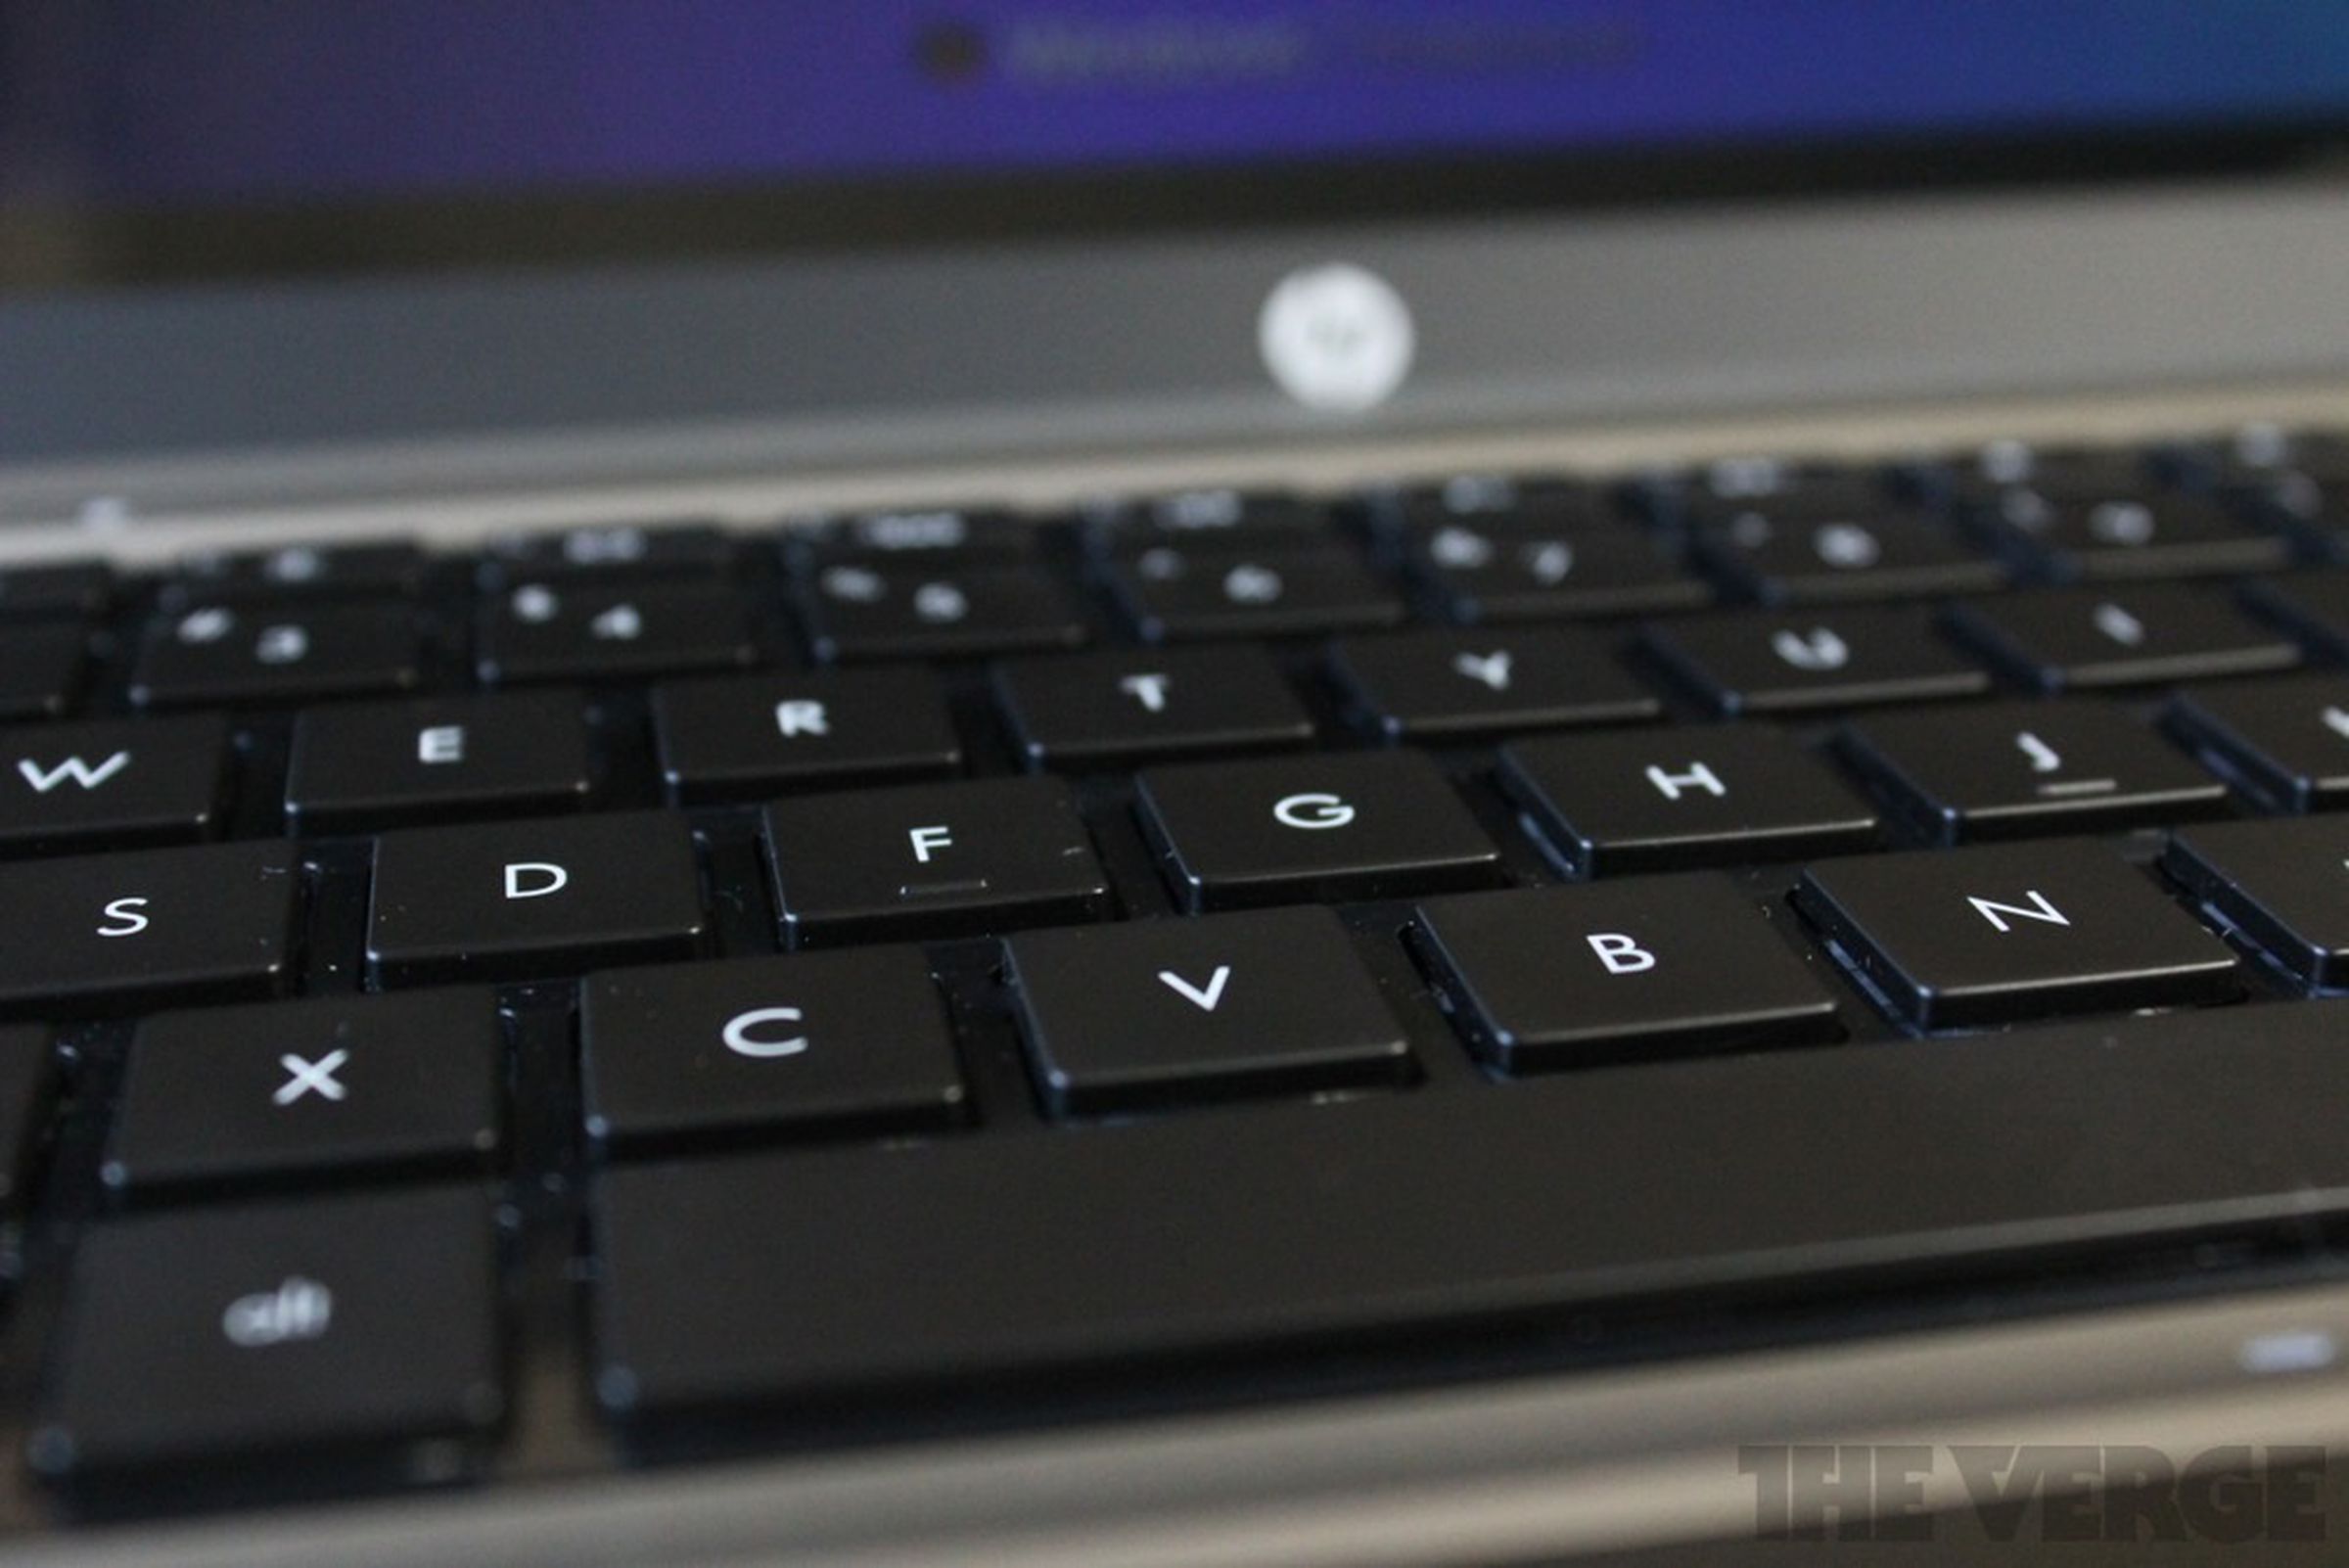 HP Folio 13 ultrabook review photo gallery